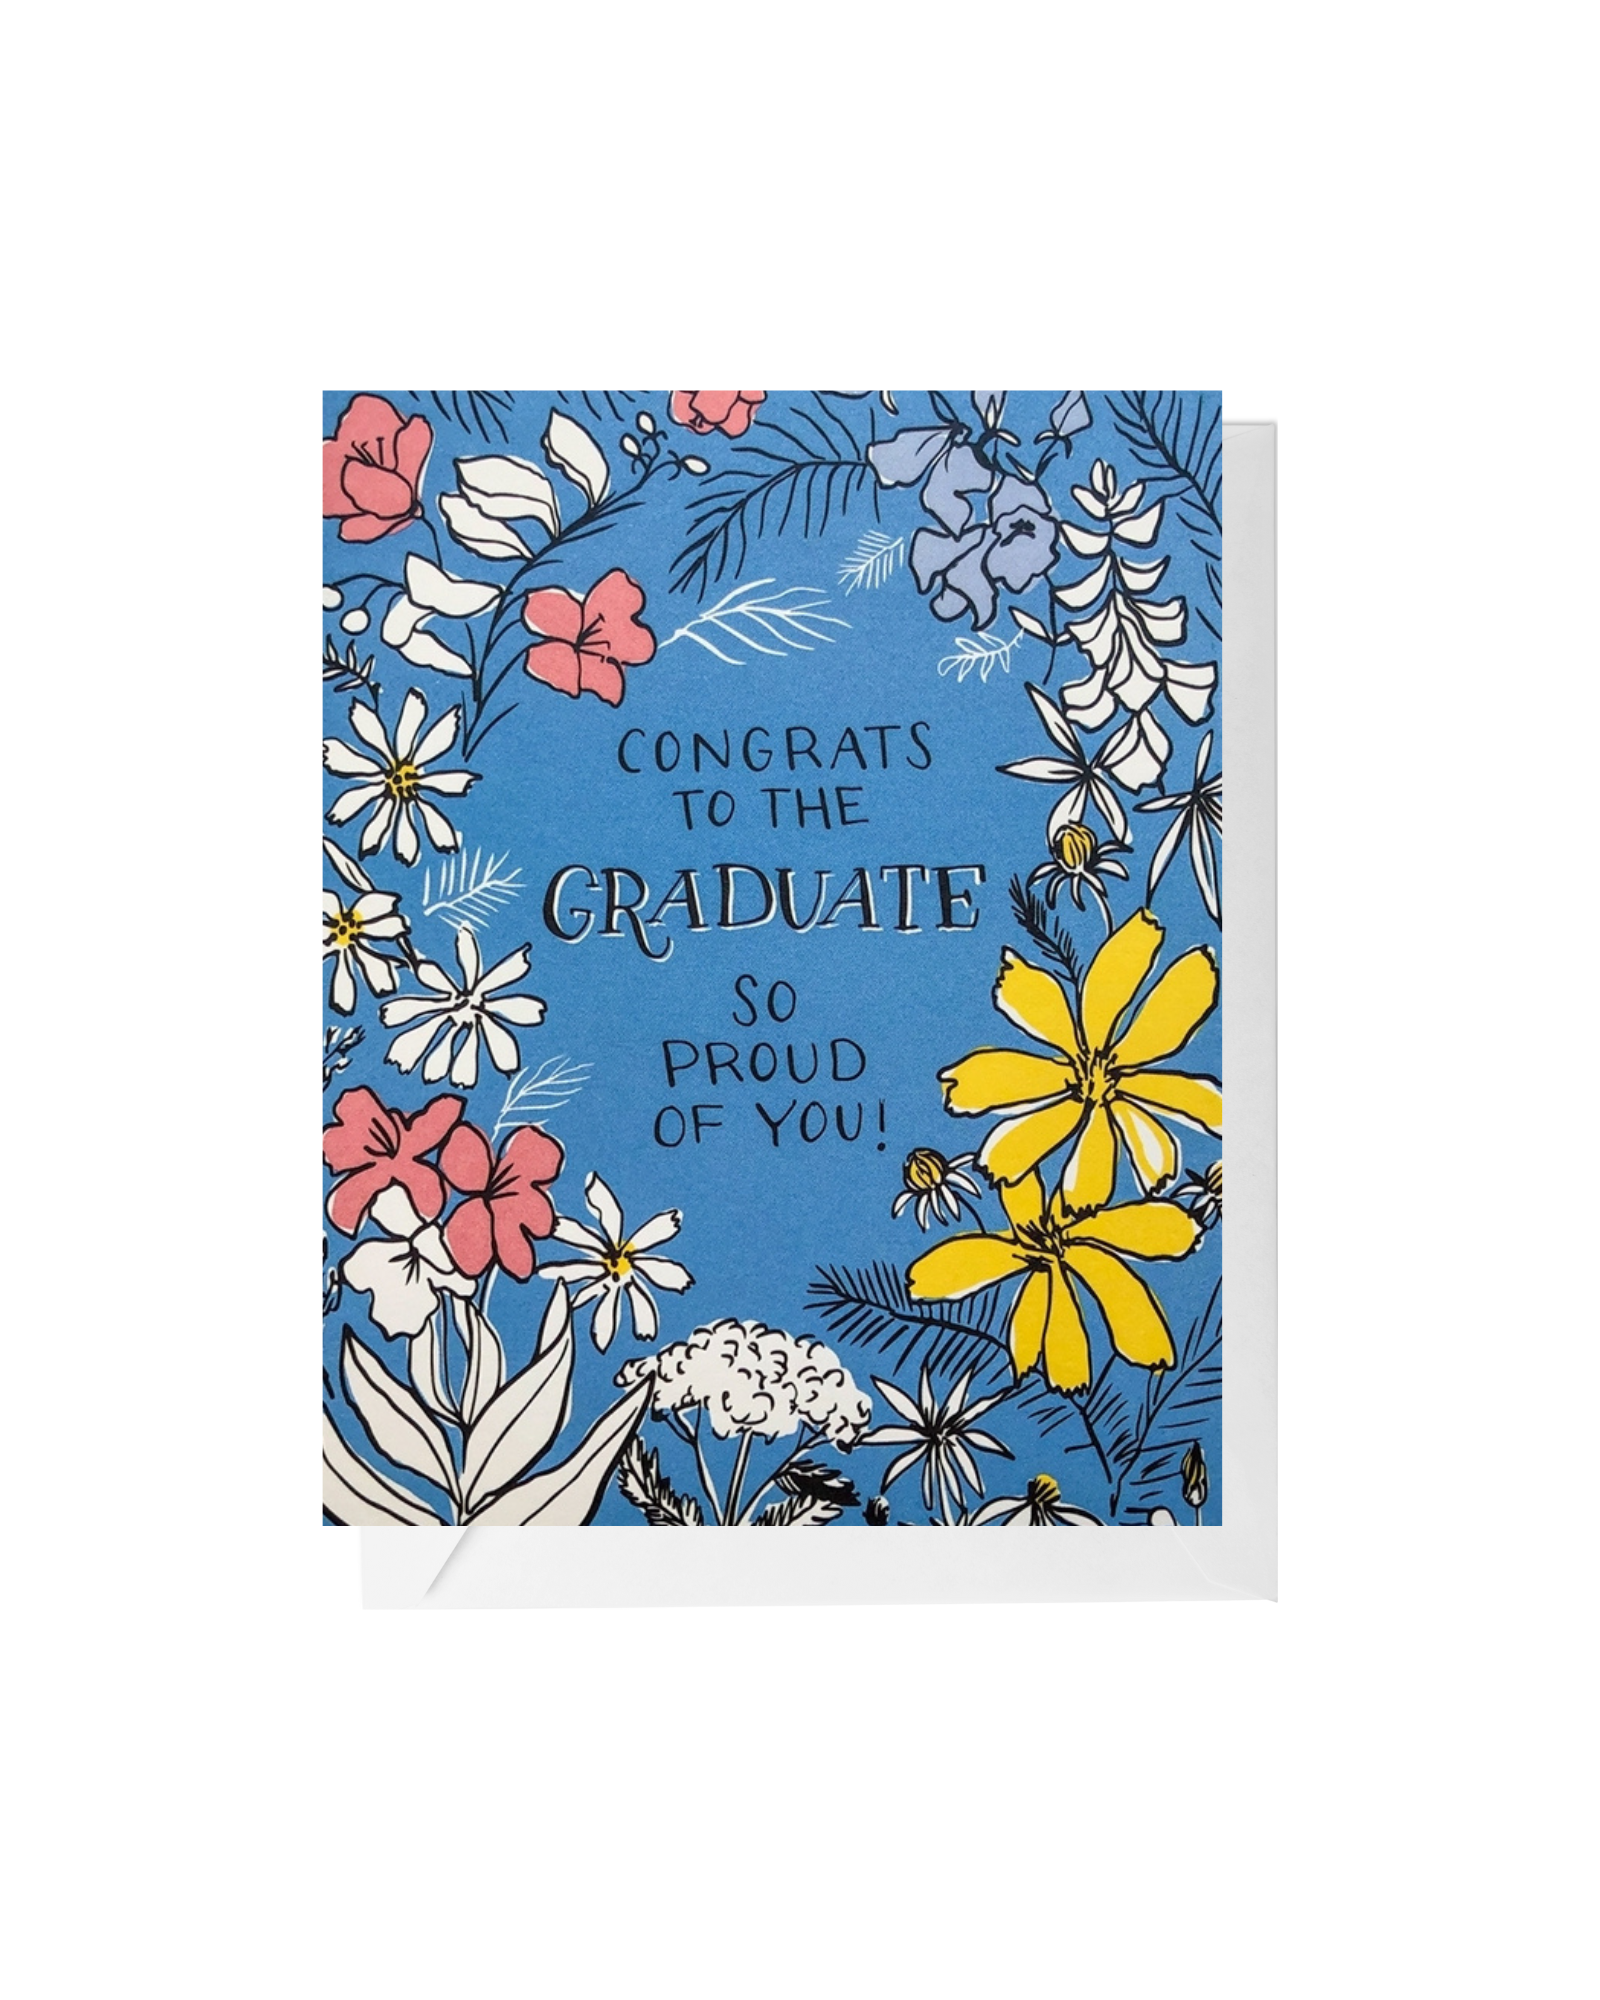 Blue greeting card and white envelope. Floral illustrations surround the words "congrats to the graduate so proud of you!" in handwritten script. 